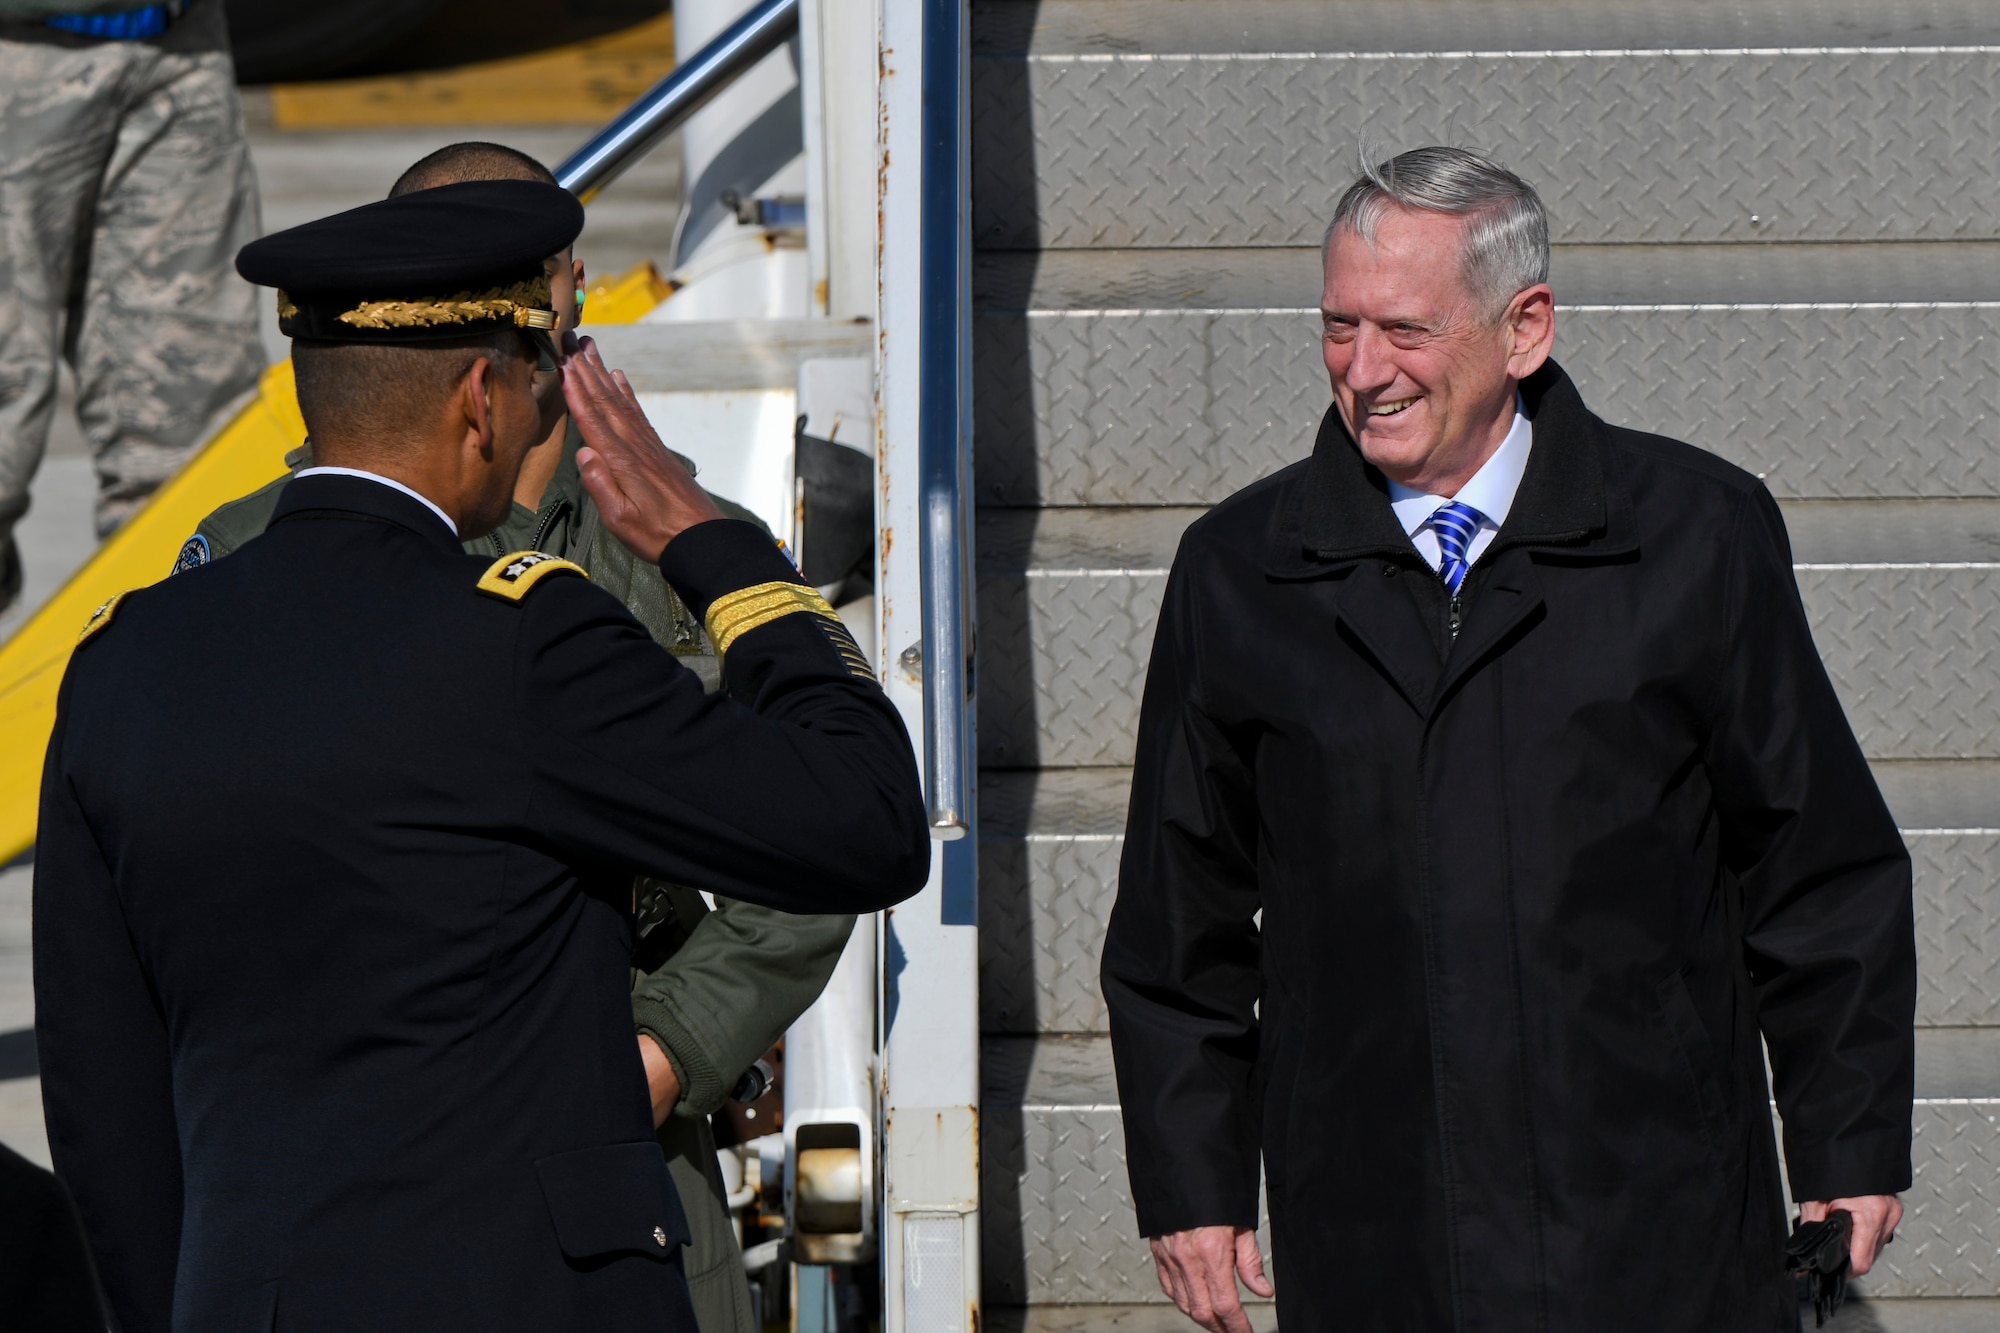 Defense Secretary Jim Mattis greets U.S. Army Gen. Vincent K. Brooks, United States Forces Korea commander, as he arrives at Osan Air Base, Republic of Korea, Feb. 2, 2017. The visit, which is Mattis’ first official visit to a foreign country as secretary of defense, highlighted the common traits and strengths shared by the U.S. and ROK governments, including the commitment to bi-lateral cooperation in keeping regional safety and stability in check. (U.S. Air Force photo by Staff Sgt. Victor J. Caputo)